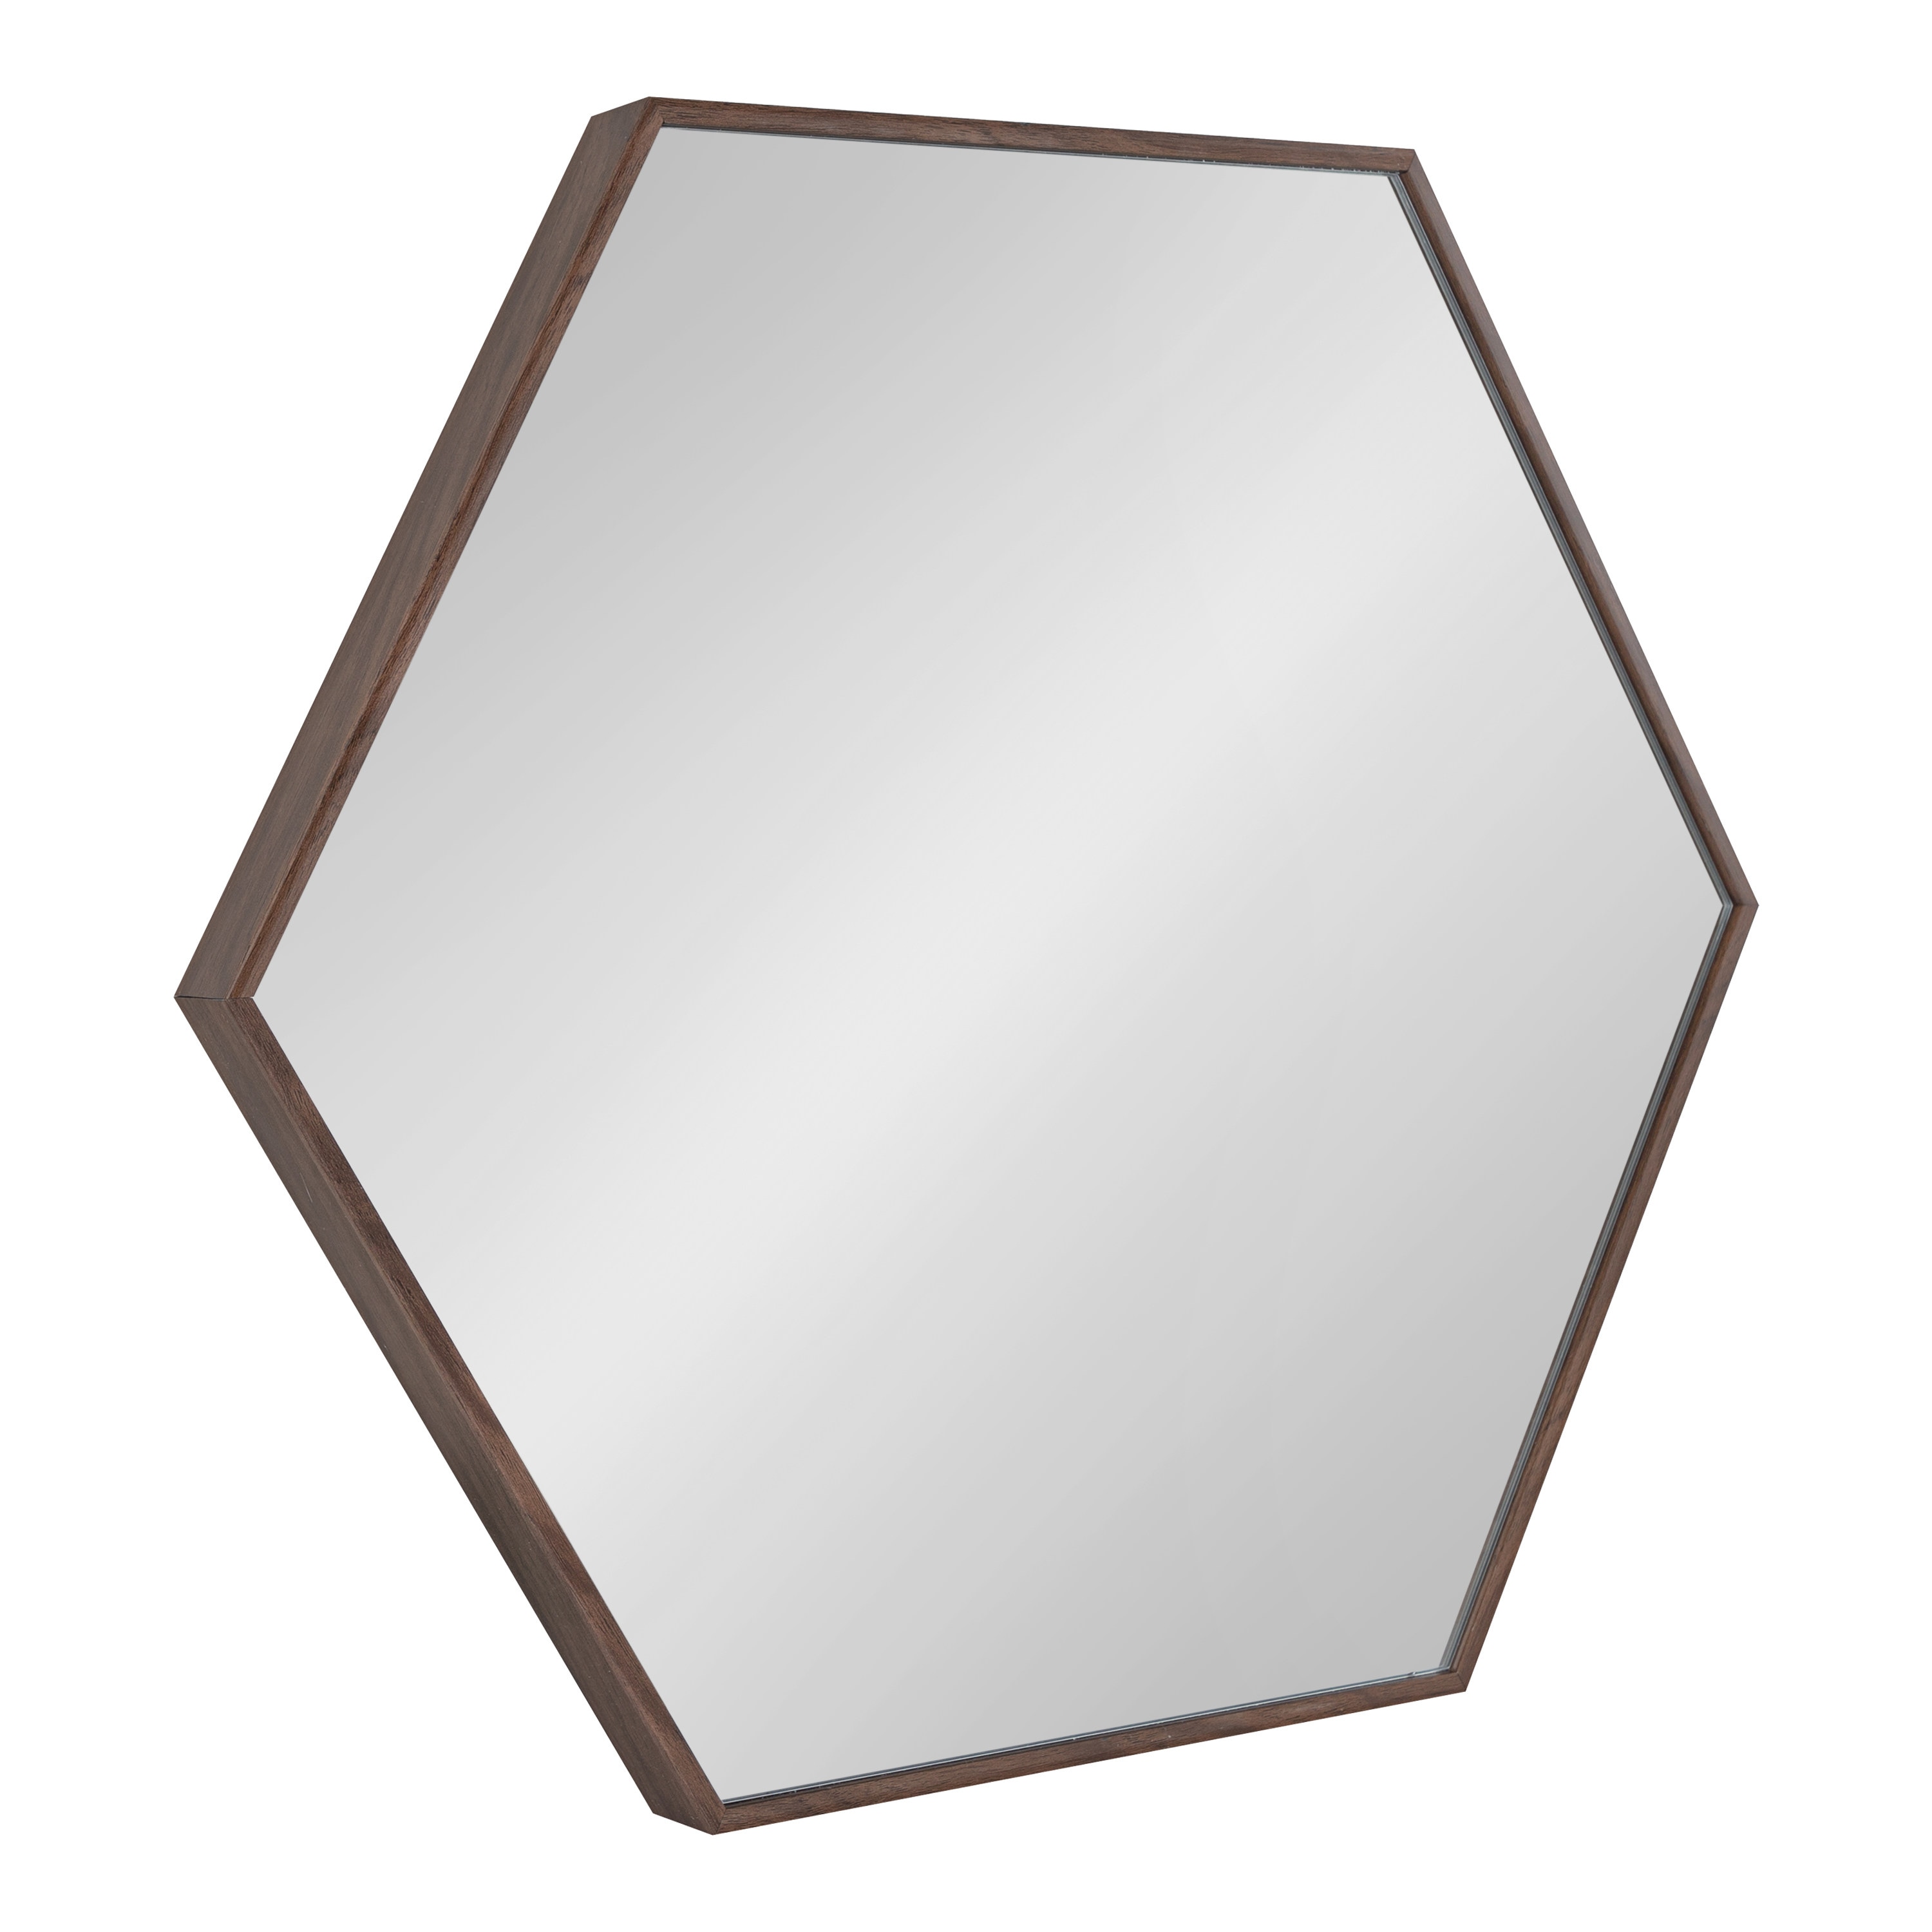 Kate and Laurel Rhodes 22-in W x 25-in H Hexagon Walnut Brown Framed Wall Mirror